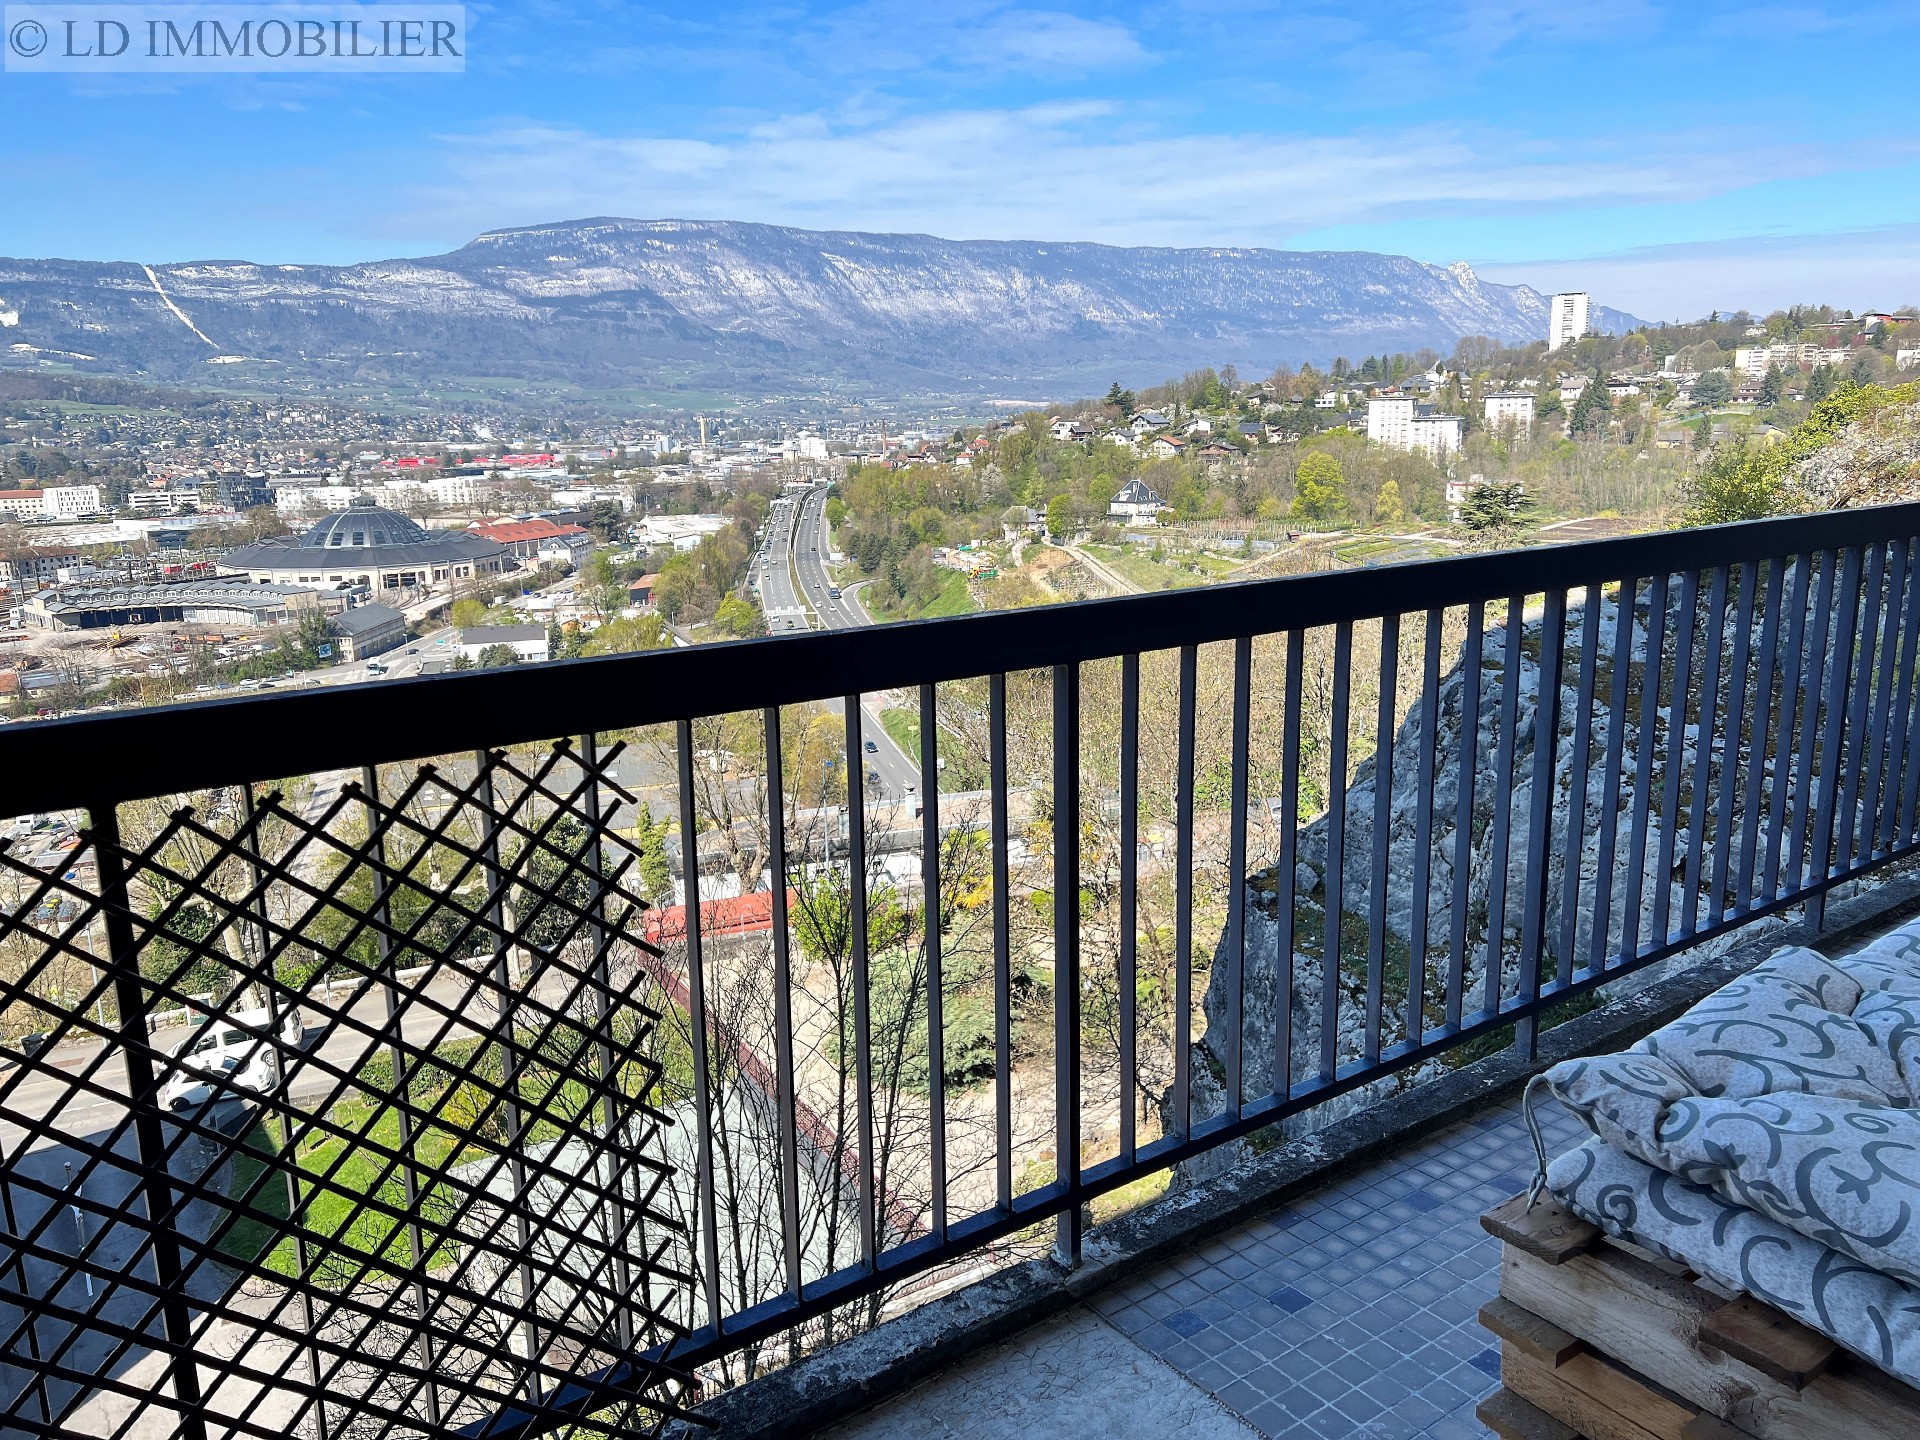 Vente appartement - CHAMBERY 61 m², 3 pièces